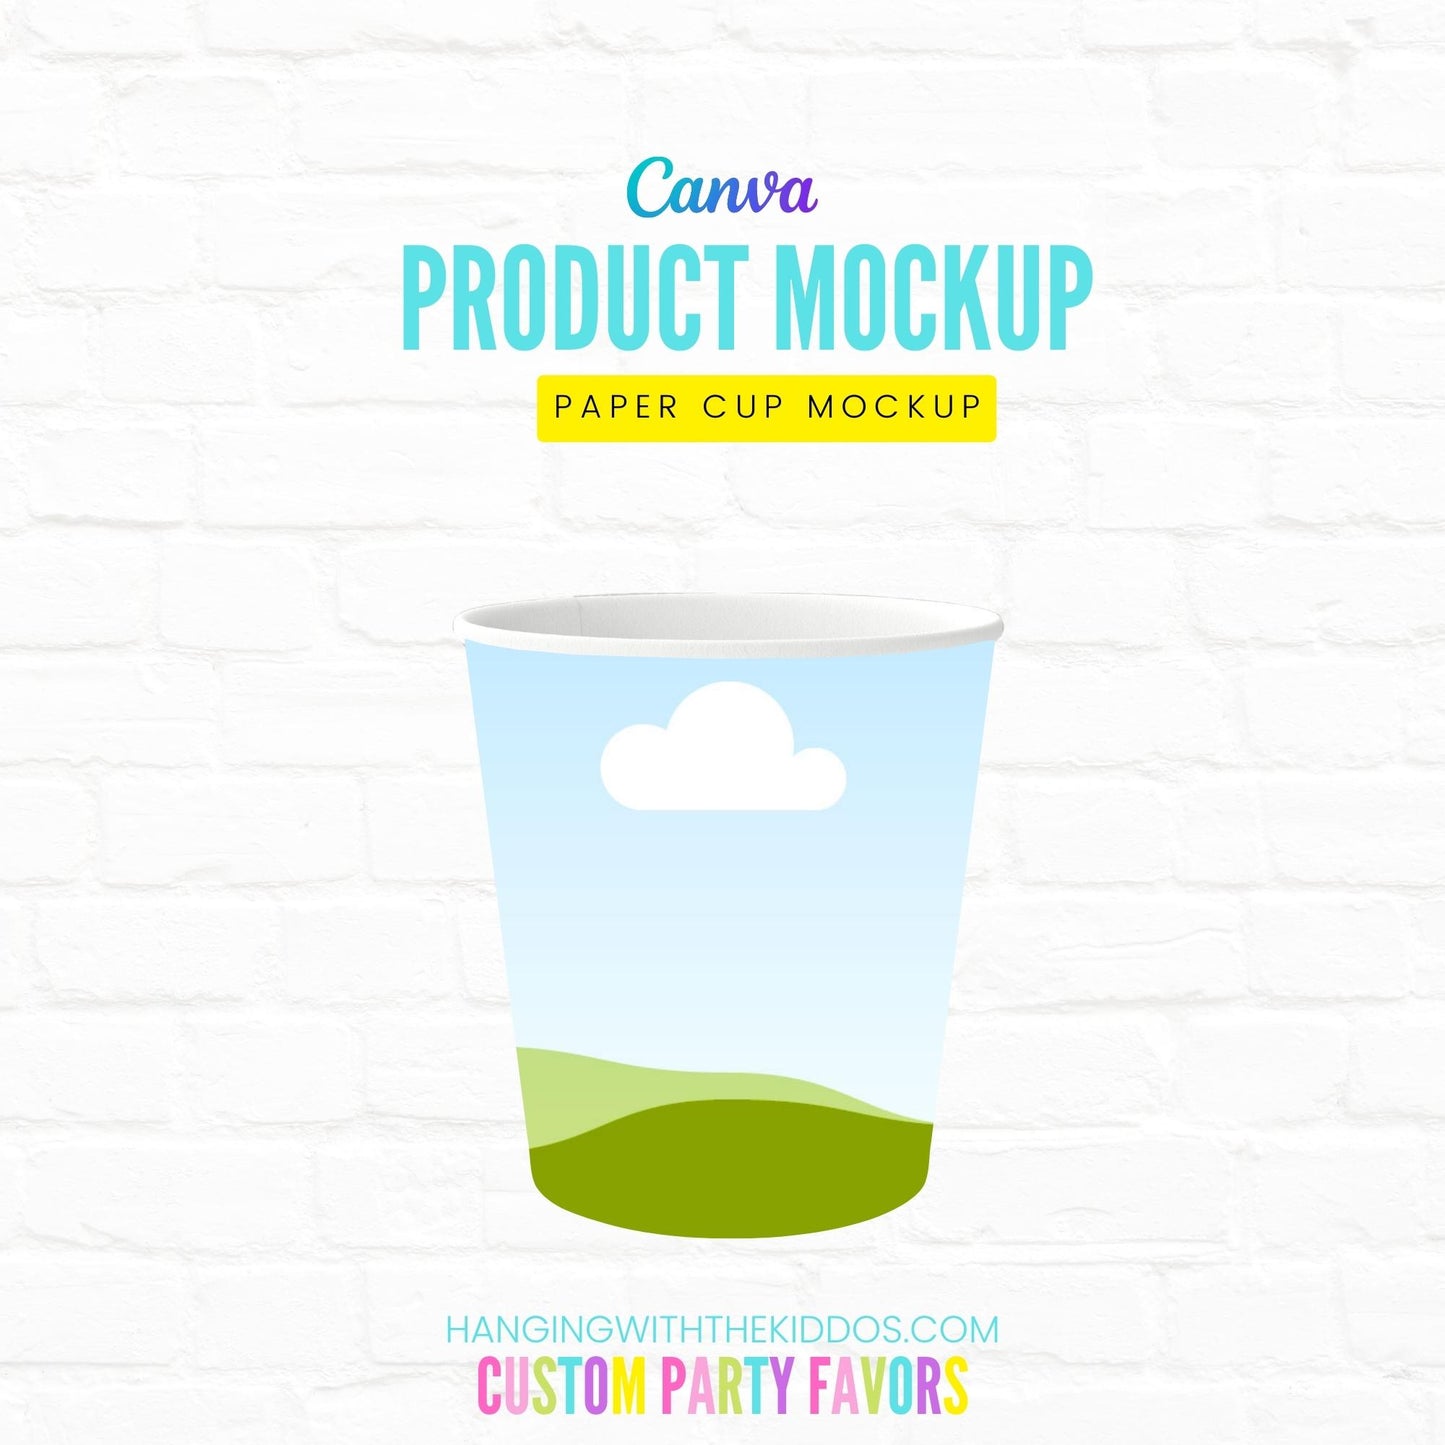 Paper Cup Mockup|Canva Template